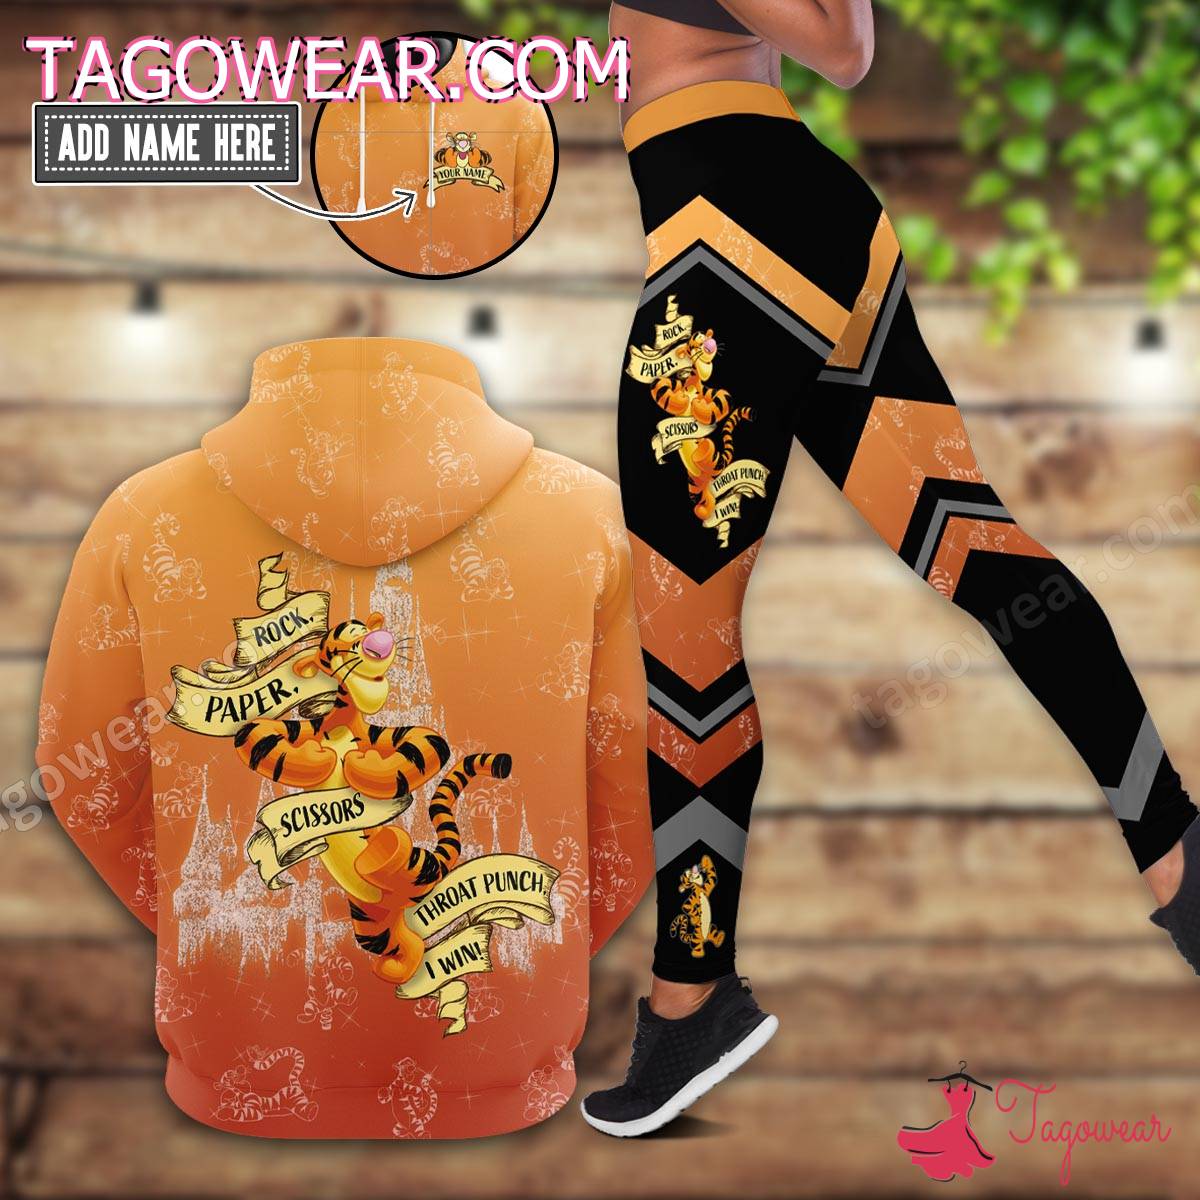 Tigger Rock Paper Scissors Throat Punch I Win Personalized Hoodie And Legging